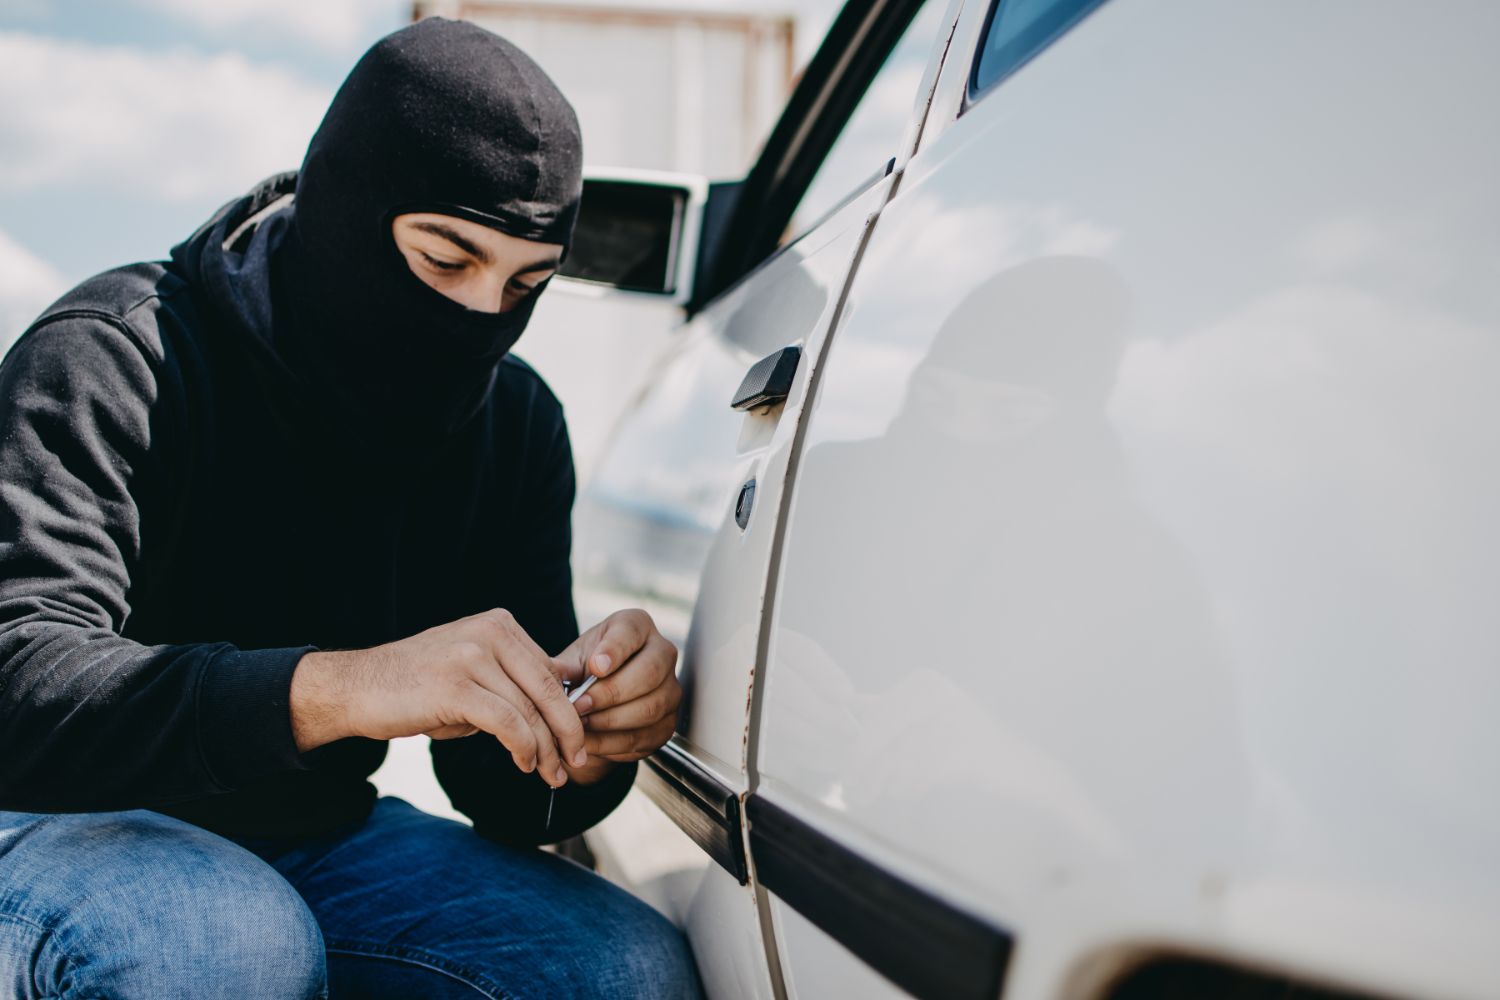 Thief trying to lock pick a car to steal it